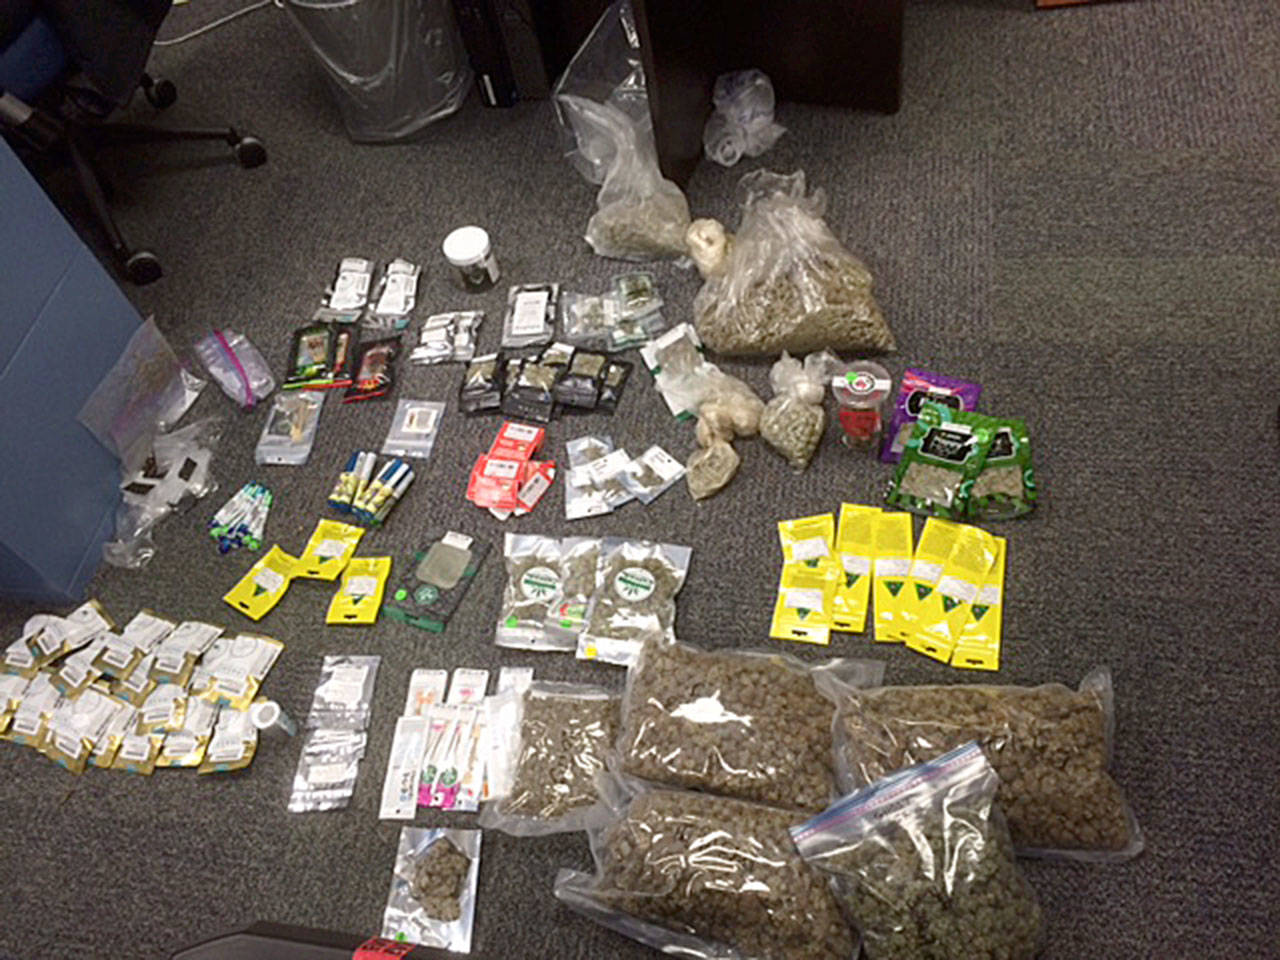 A search warrant served in Monroe on Thursday yielded about 10 pounds of reportedly stolen marijuana. (North Snohomish County property crimes unit)